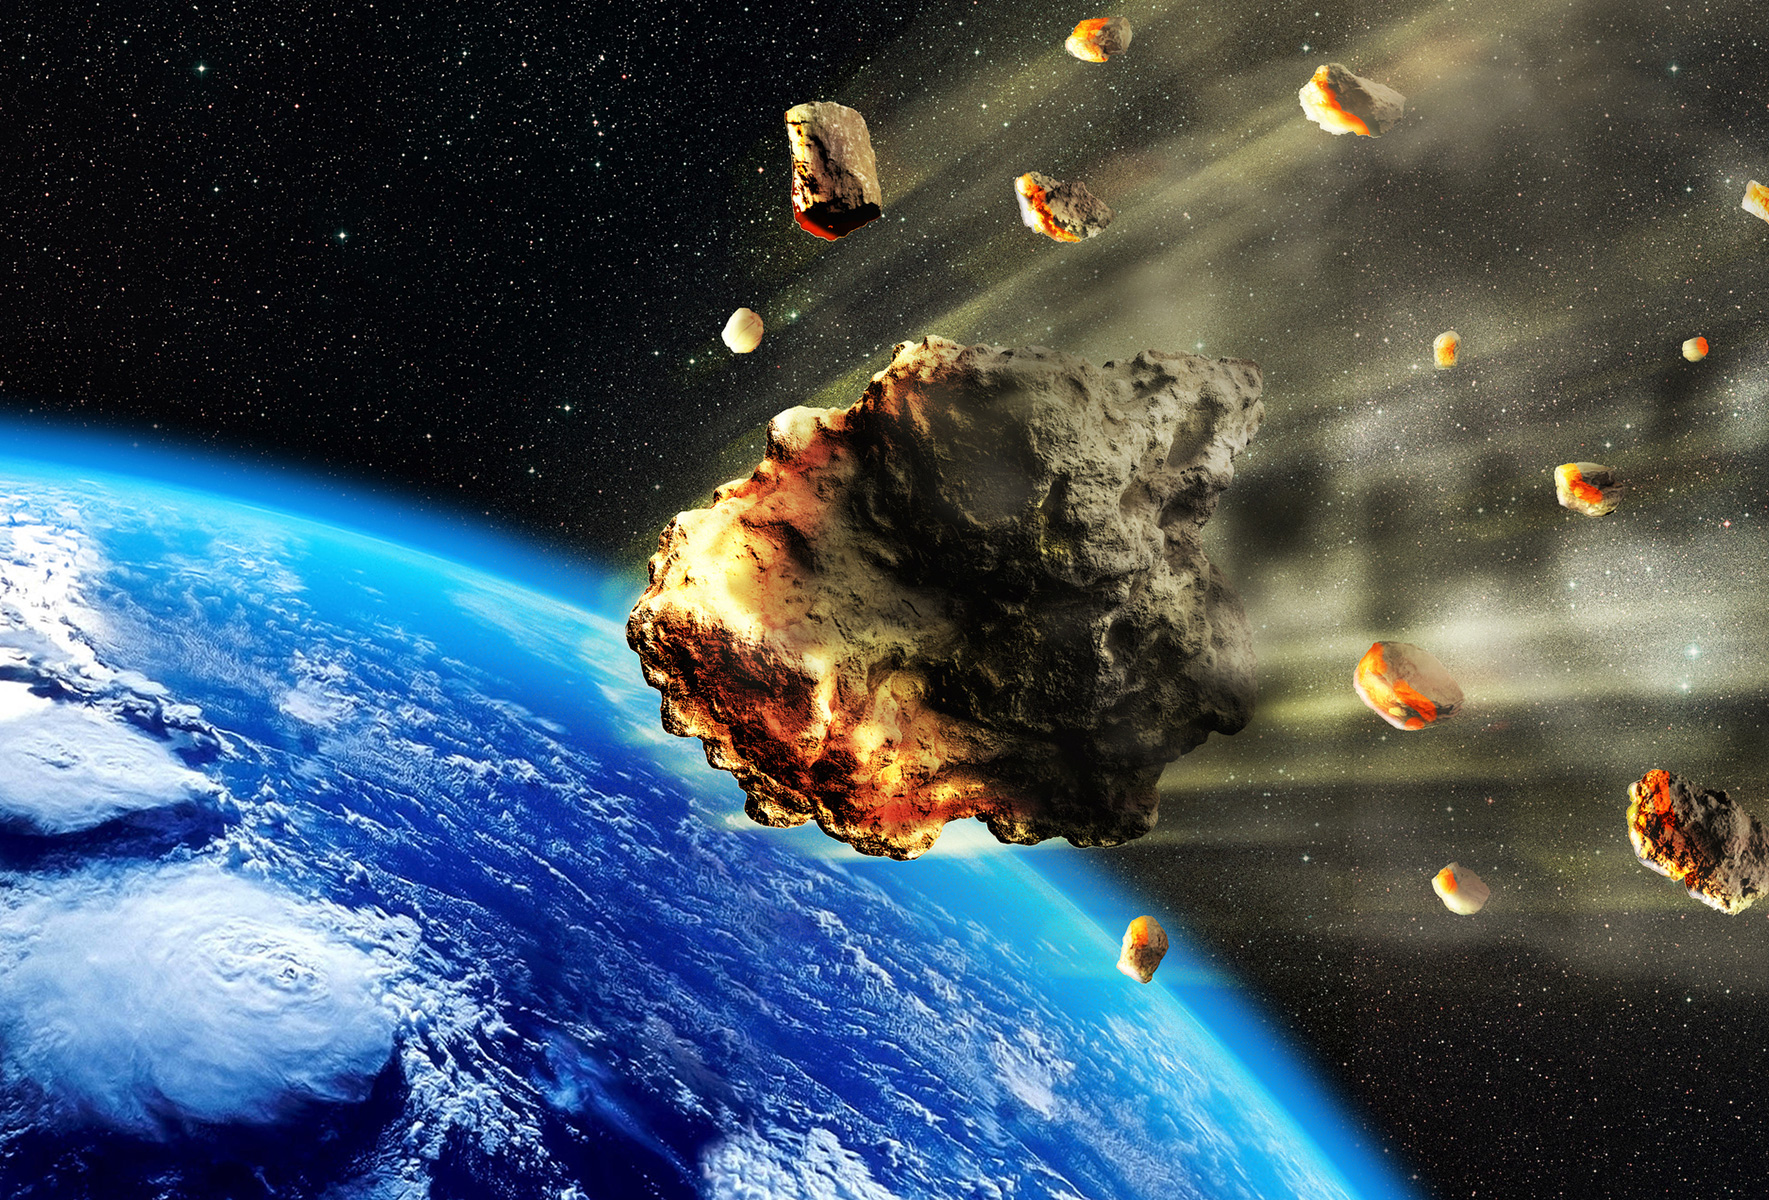 A woman was hit by a meteorite while having coffee with a friend